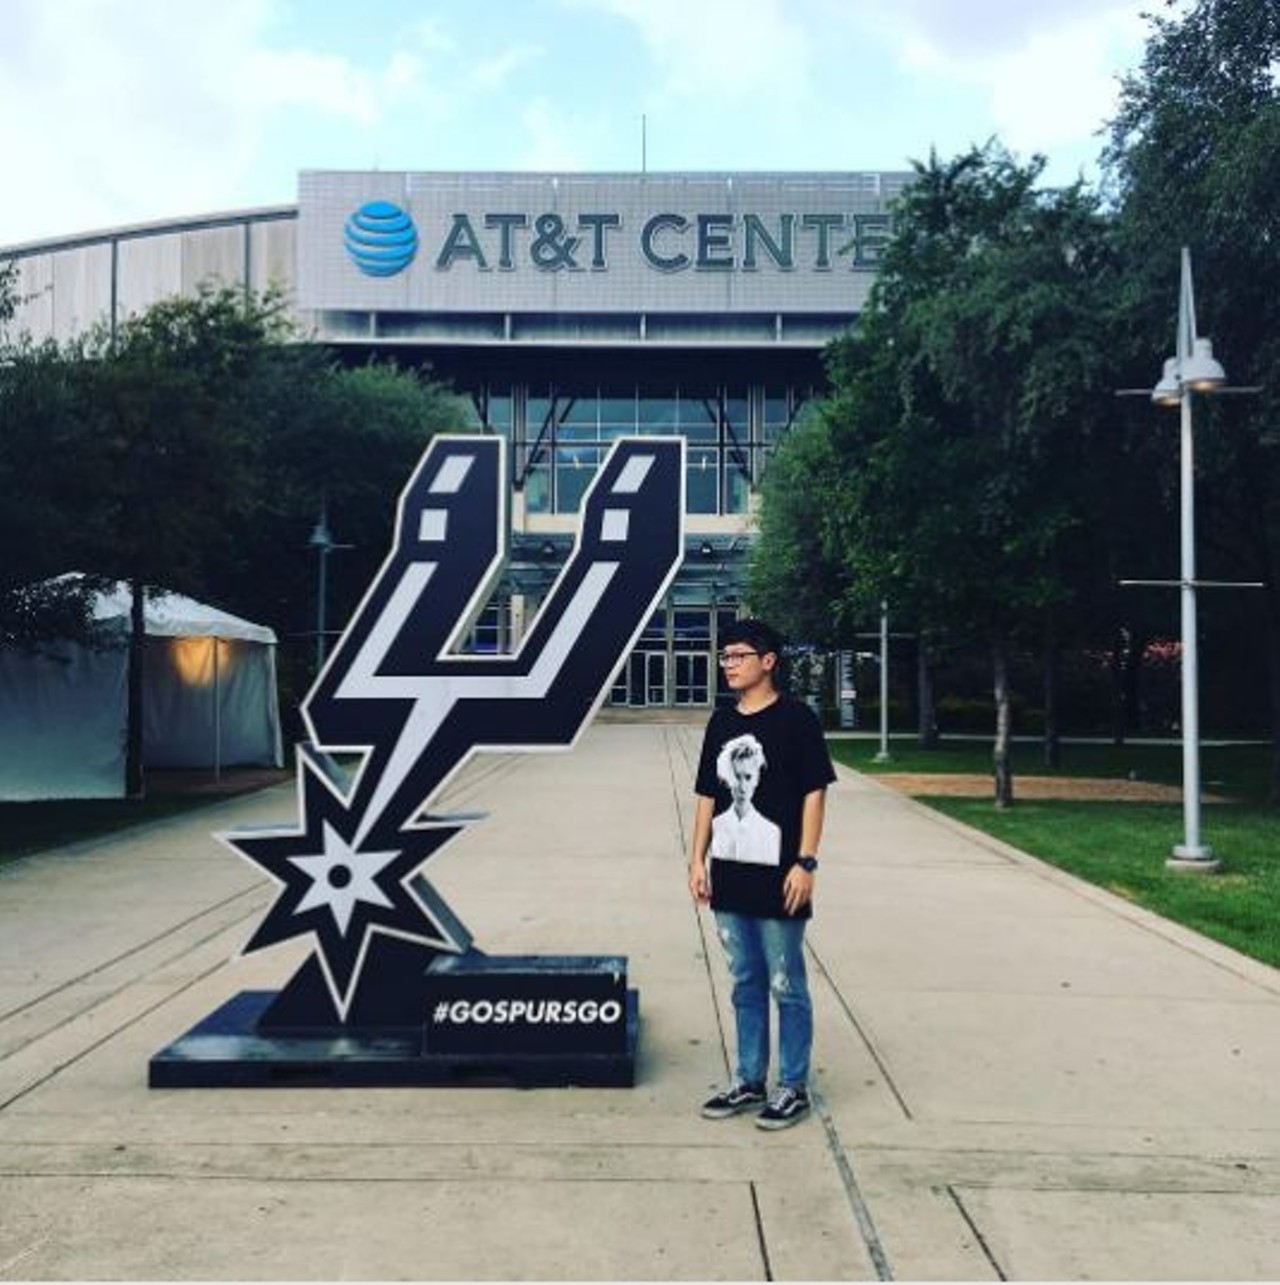 AT&T Center
1 AT&T Center Parkway
Whether it is a Spurs game, concert, or the rodeo. The AT&T Center is always a prime spot you always get pictures at.
Photo via Instagram 
luowei_0708
